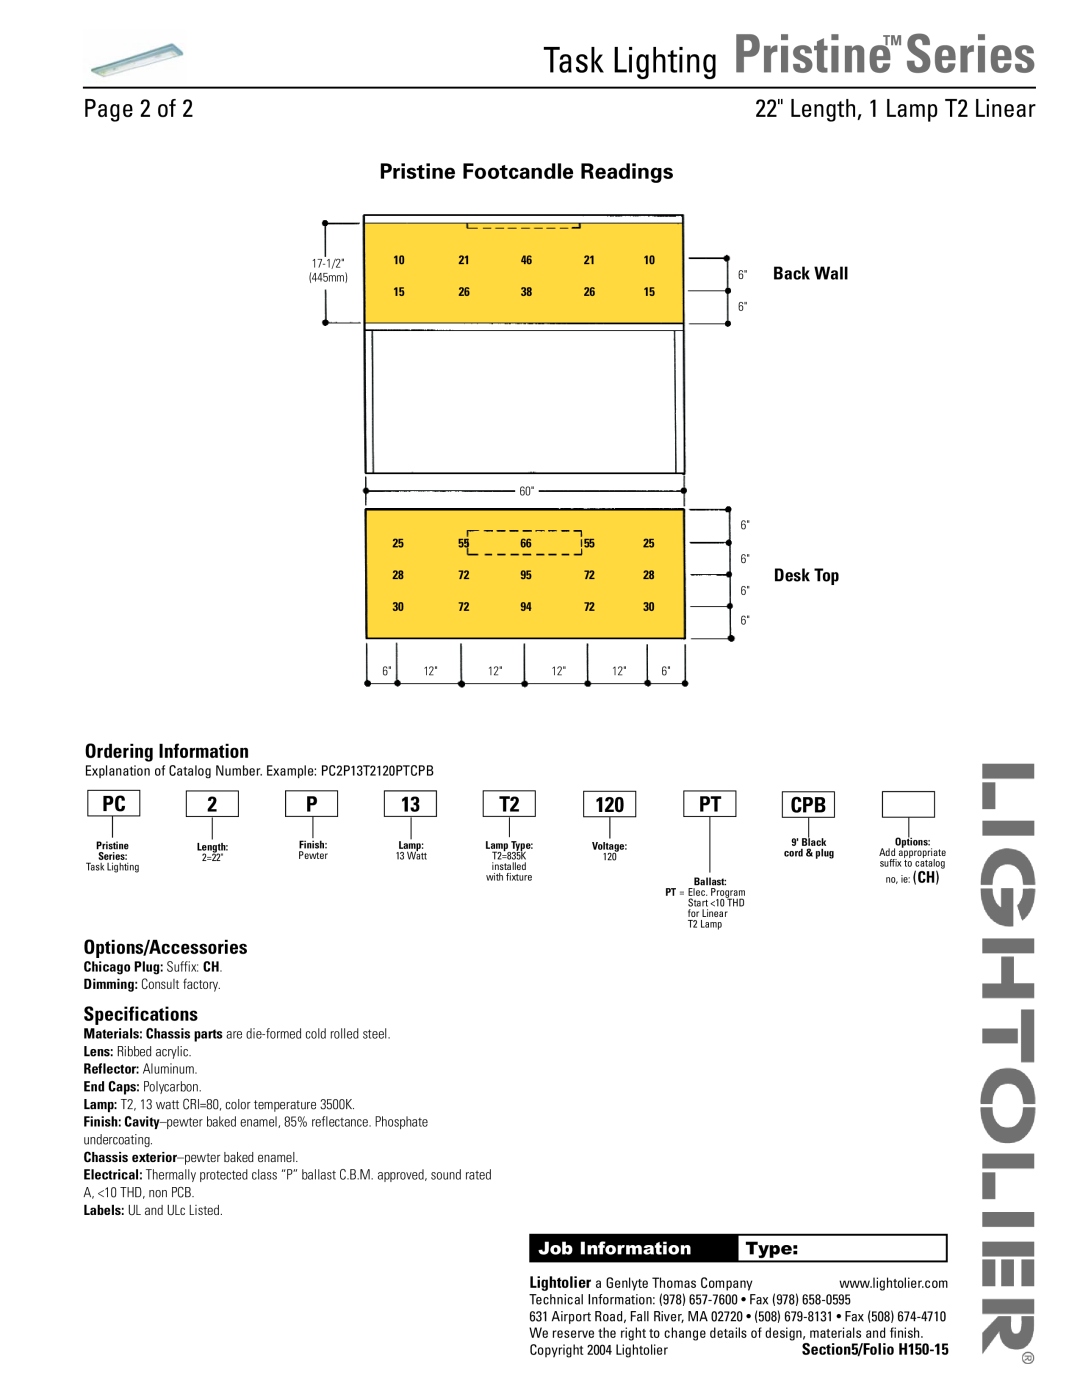 Lightolier Pristine Series Page 2 of, Ordering Information, Options/Accessories, Specifications, Length, 1 Lamp T2 Linear 